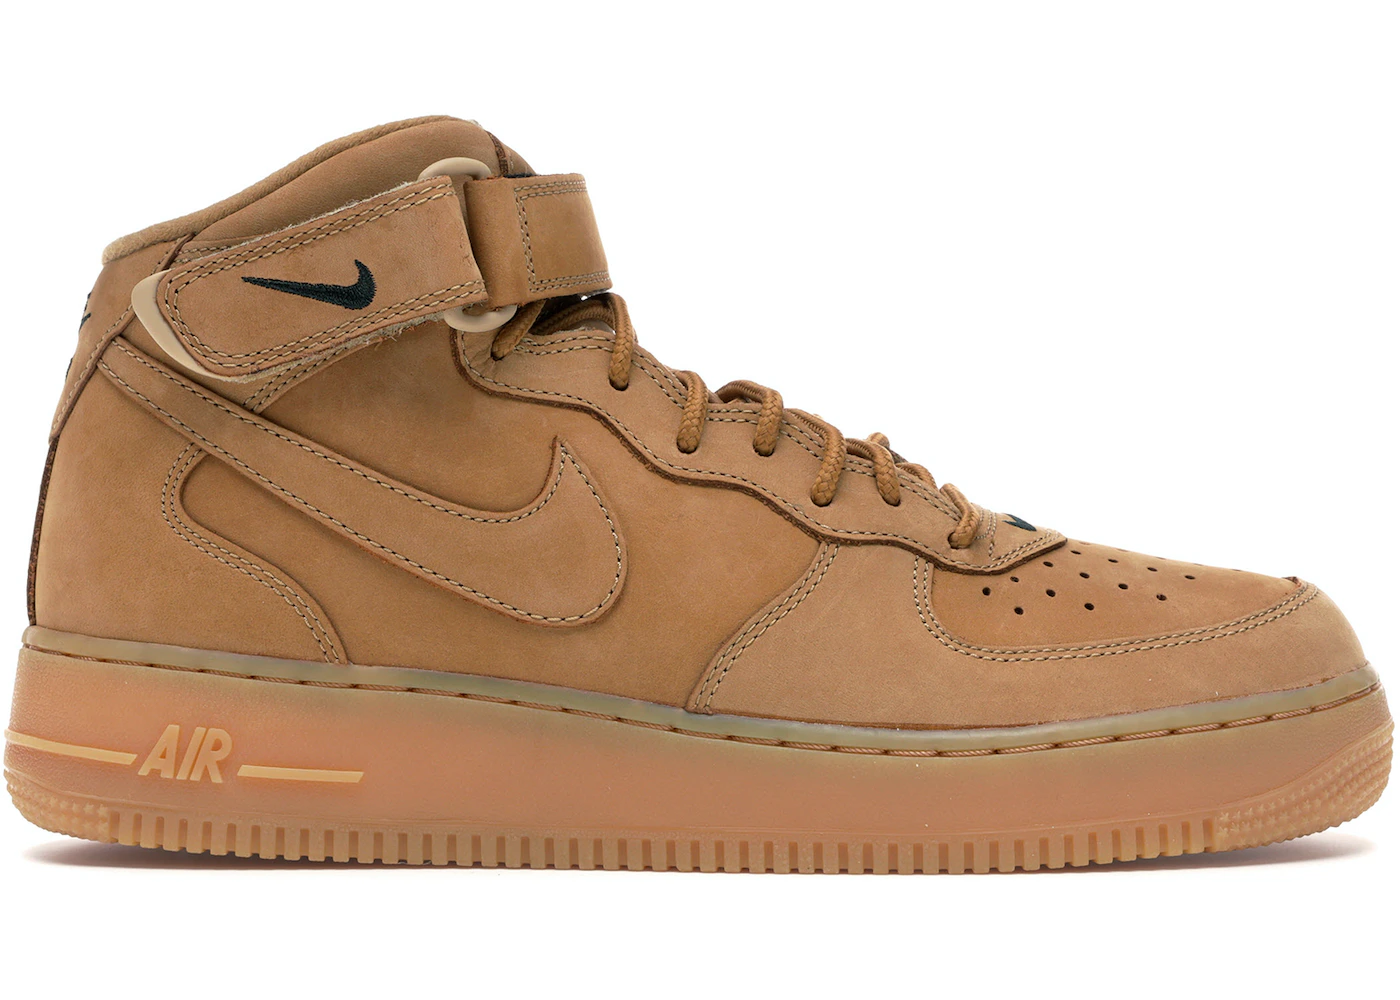 bijstand Commissie Ewell Nike Air Force 1 Mid Flax (2014) Men's - 715889-200 - US